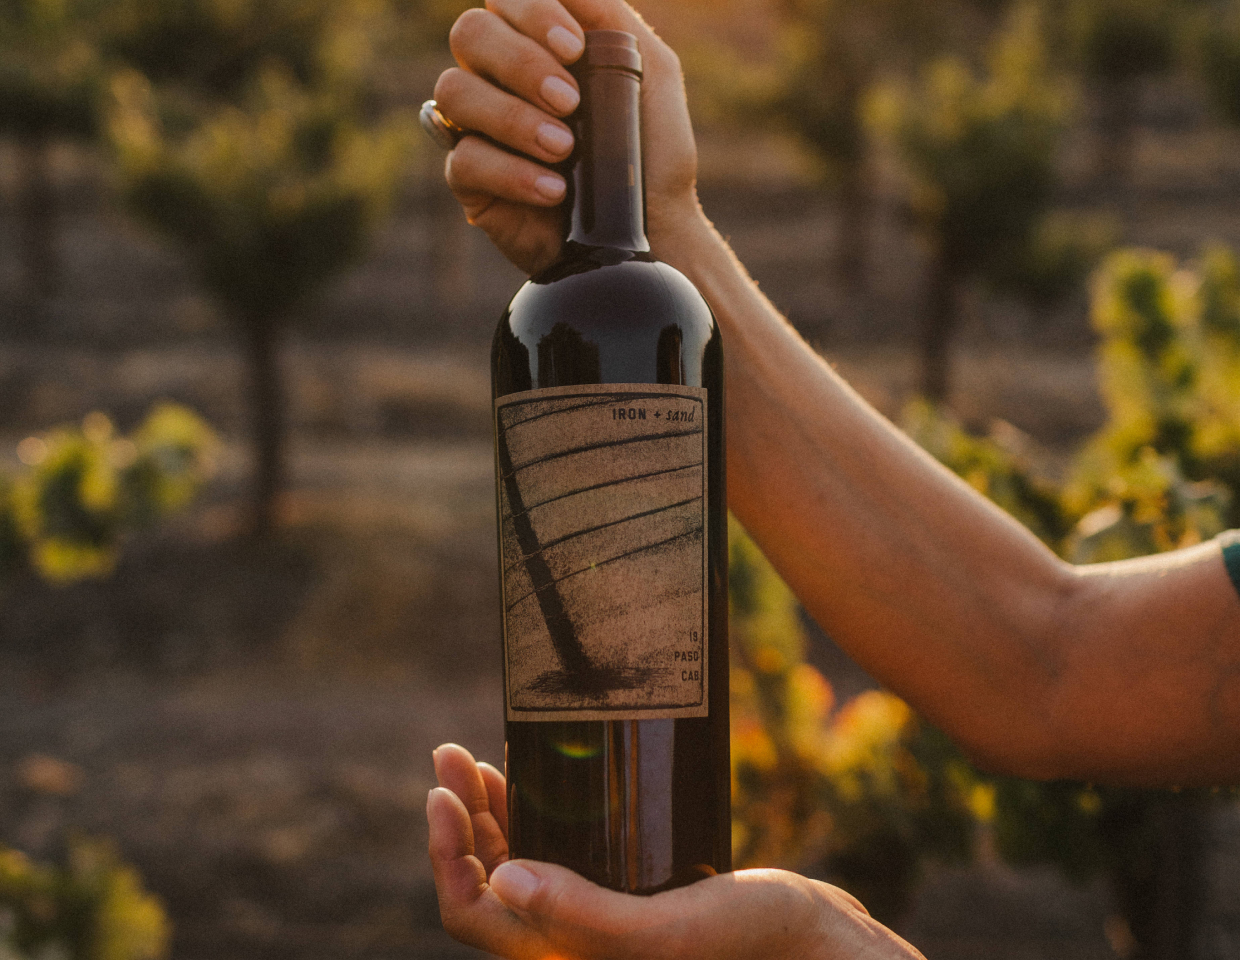 Woman holding bottle of Iron + Sand Cabernet Sauvignon in a beautiful sunlit winery